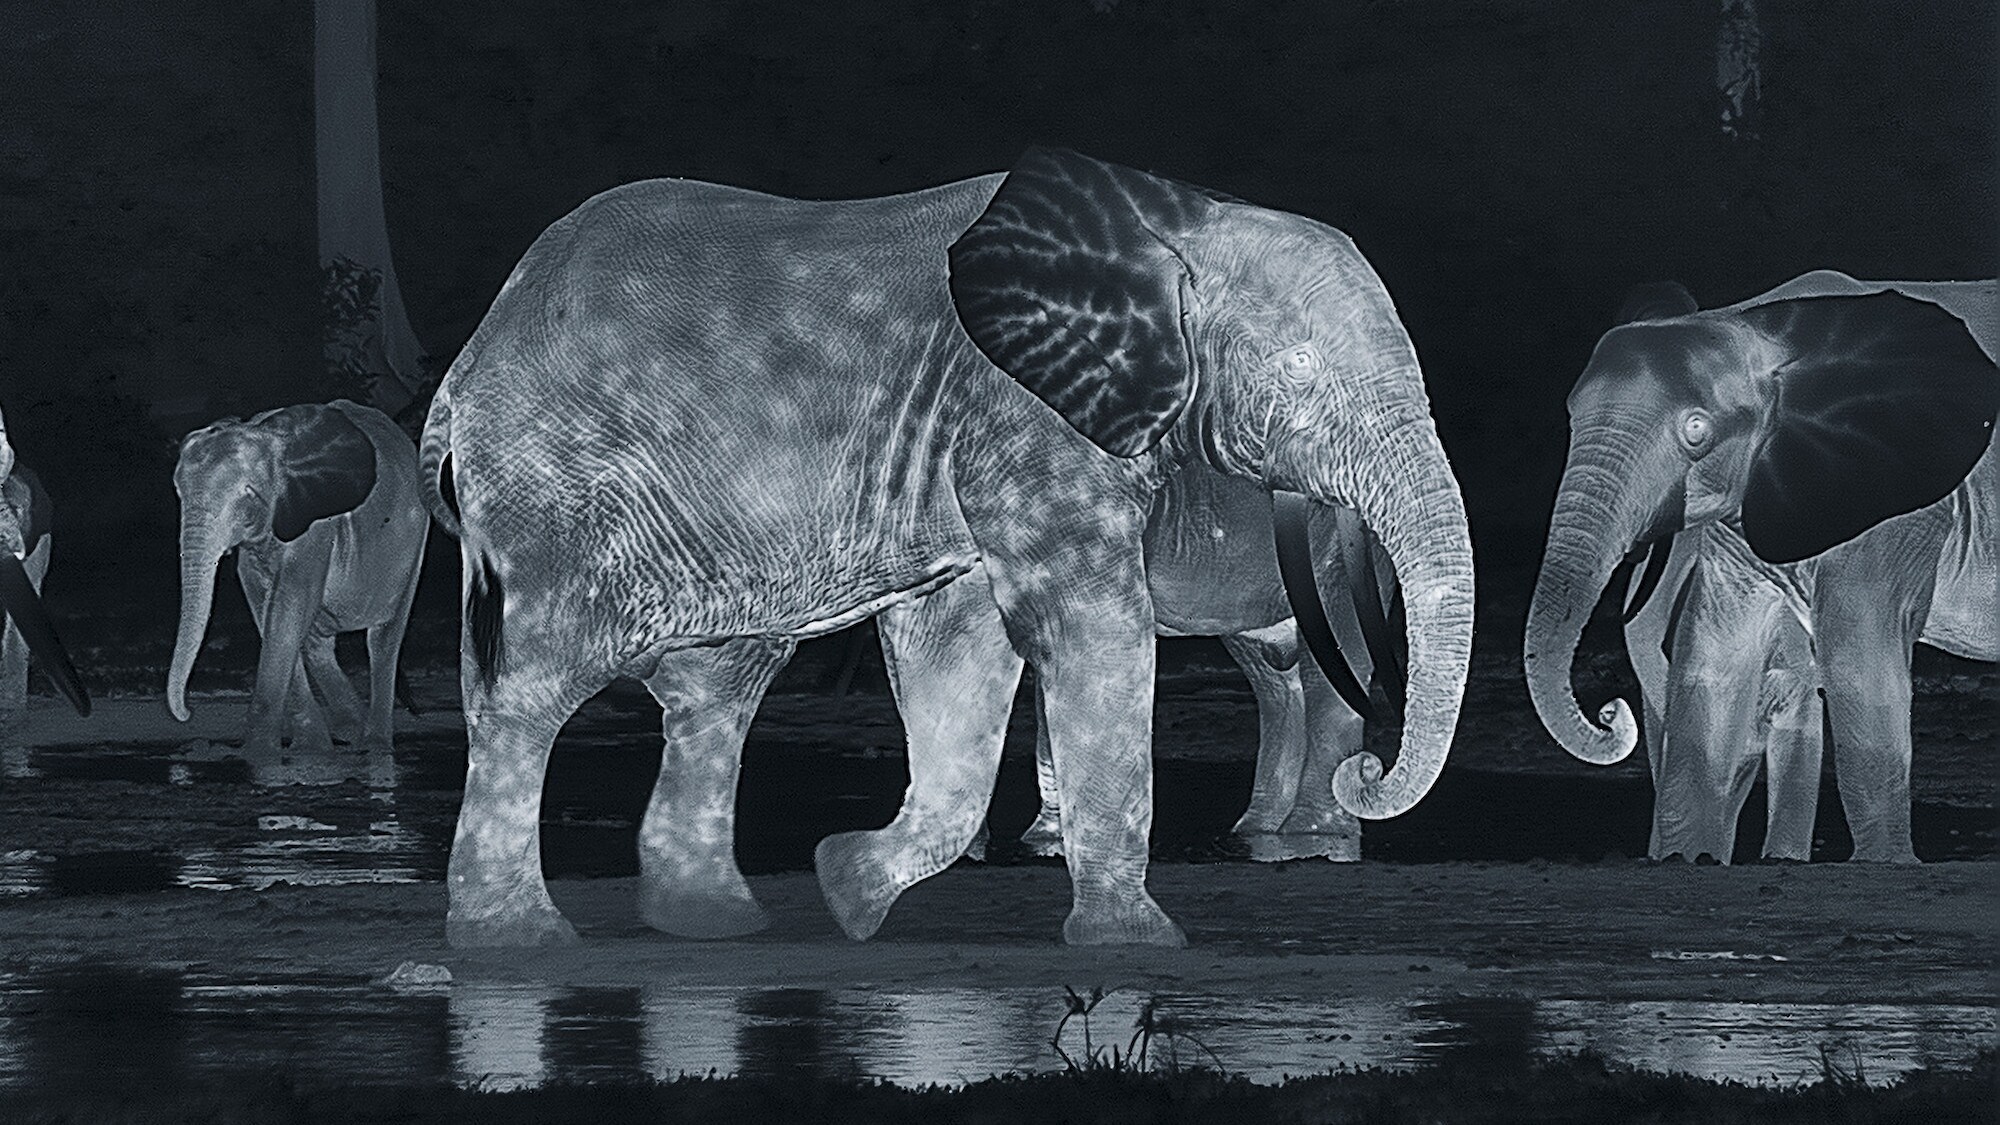 Night-cam image of elephants. (National Geographic for Disney+/Bertie Gregory)